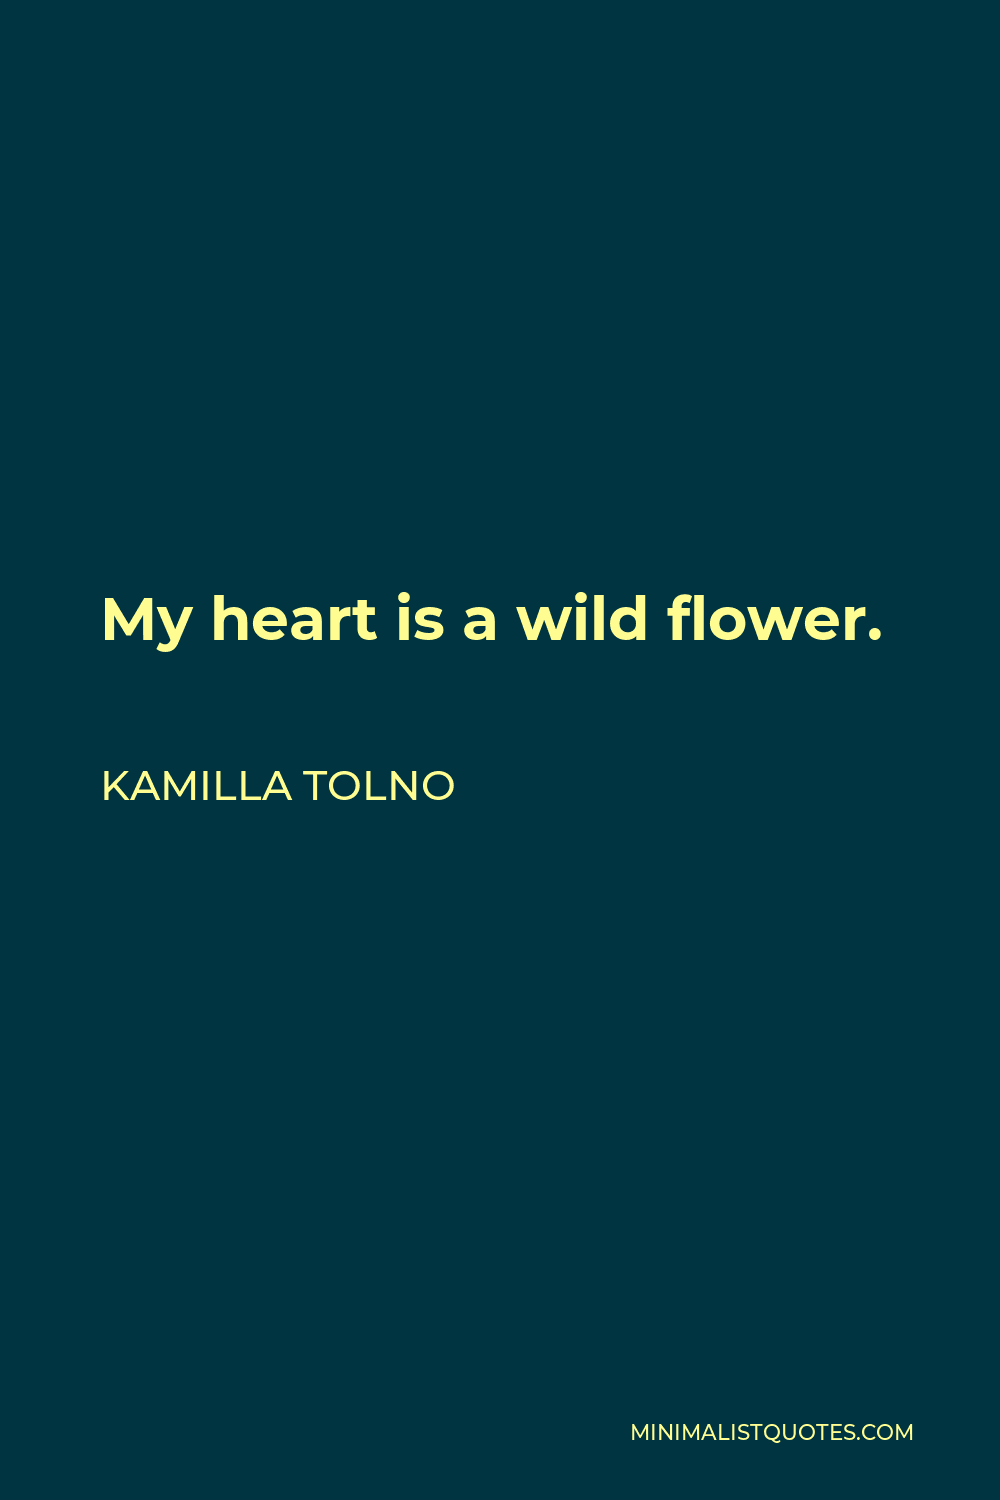 Kamilla Tolno Quote - My heart is a wild flower.